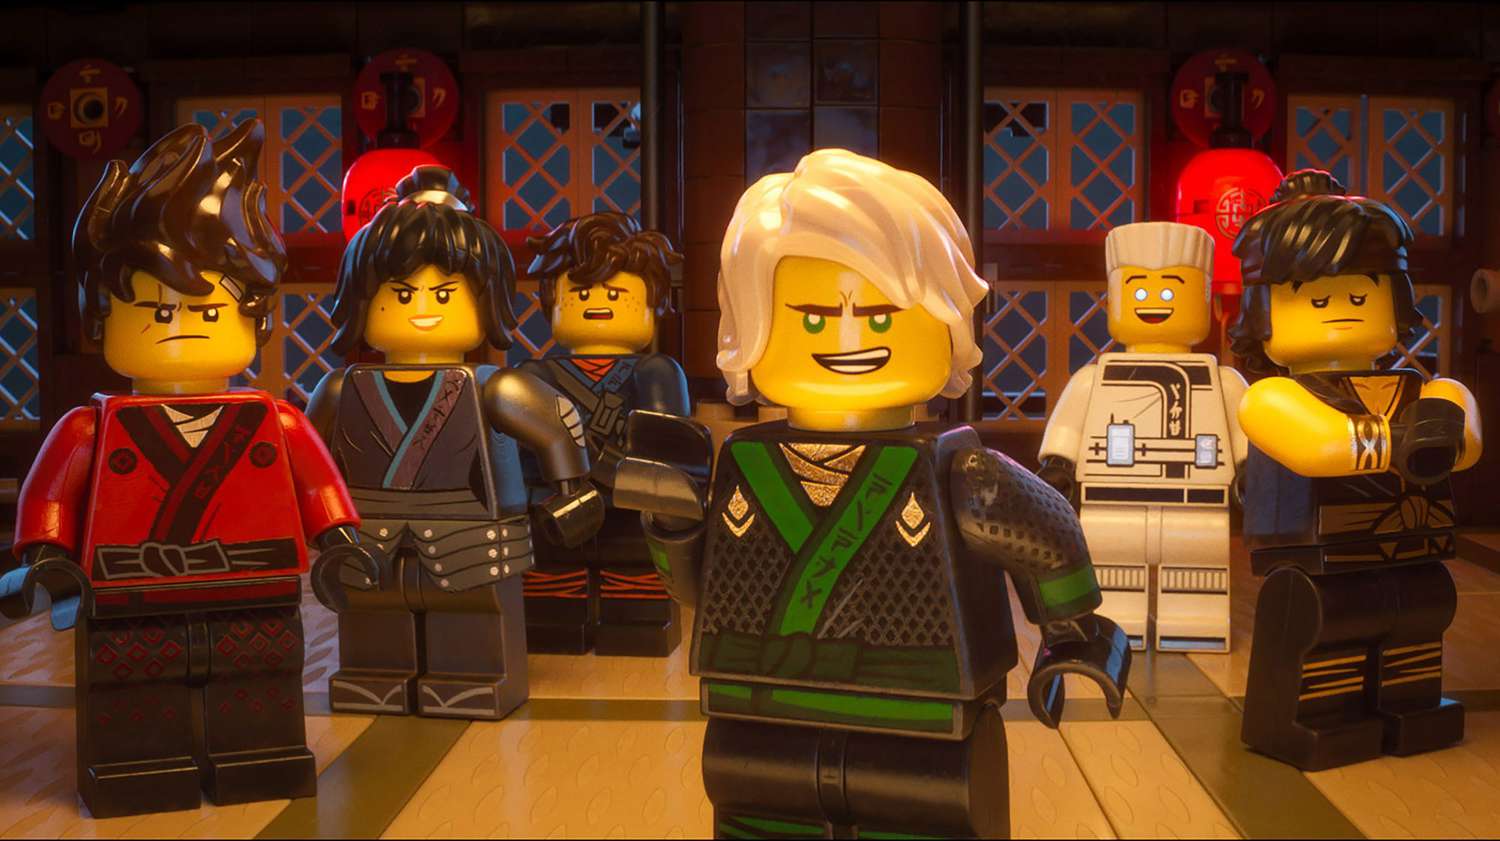 Egnet Victor Ananiver The crew assembles in 'The Lego Ninjago Movie' teaser | EW.com